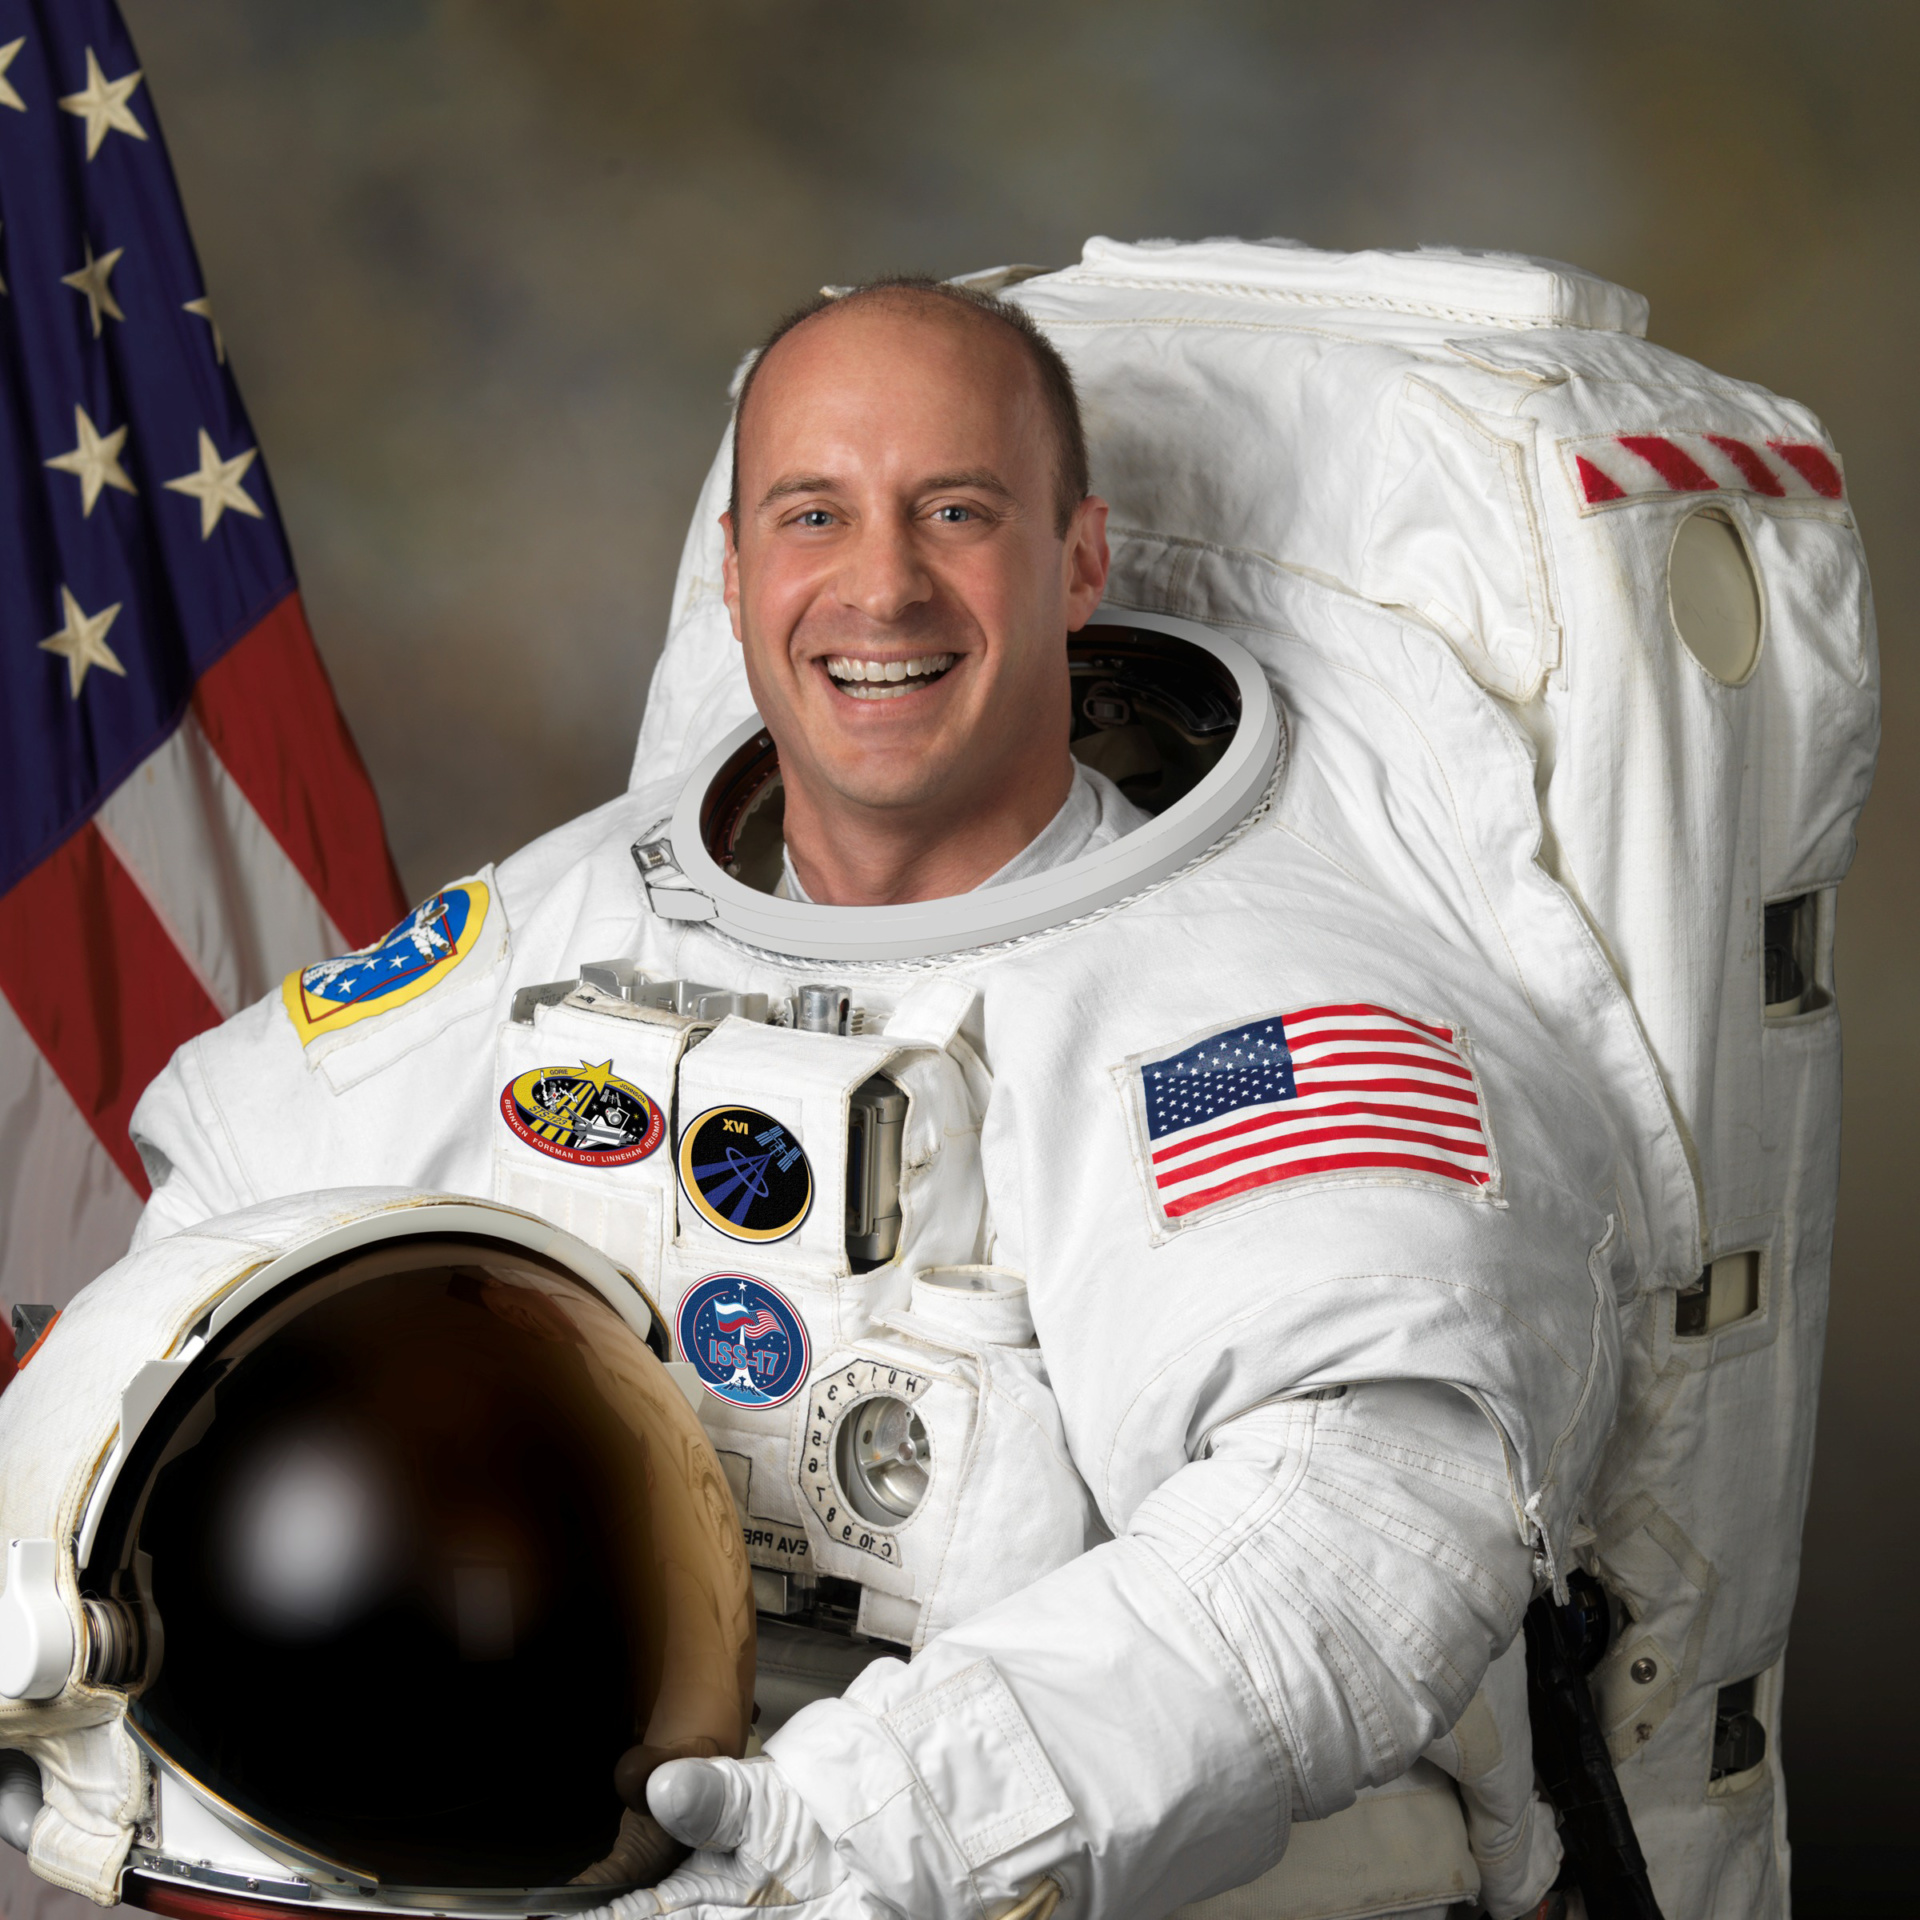 NEW Podcast: Meet Dr. Reisman, an astronaut and our newest faculty member!